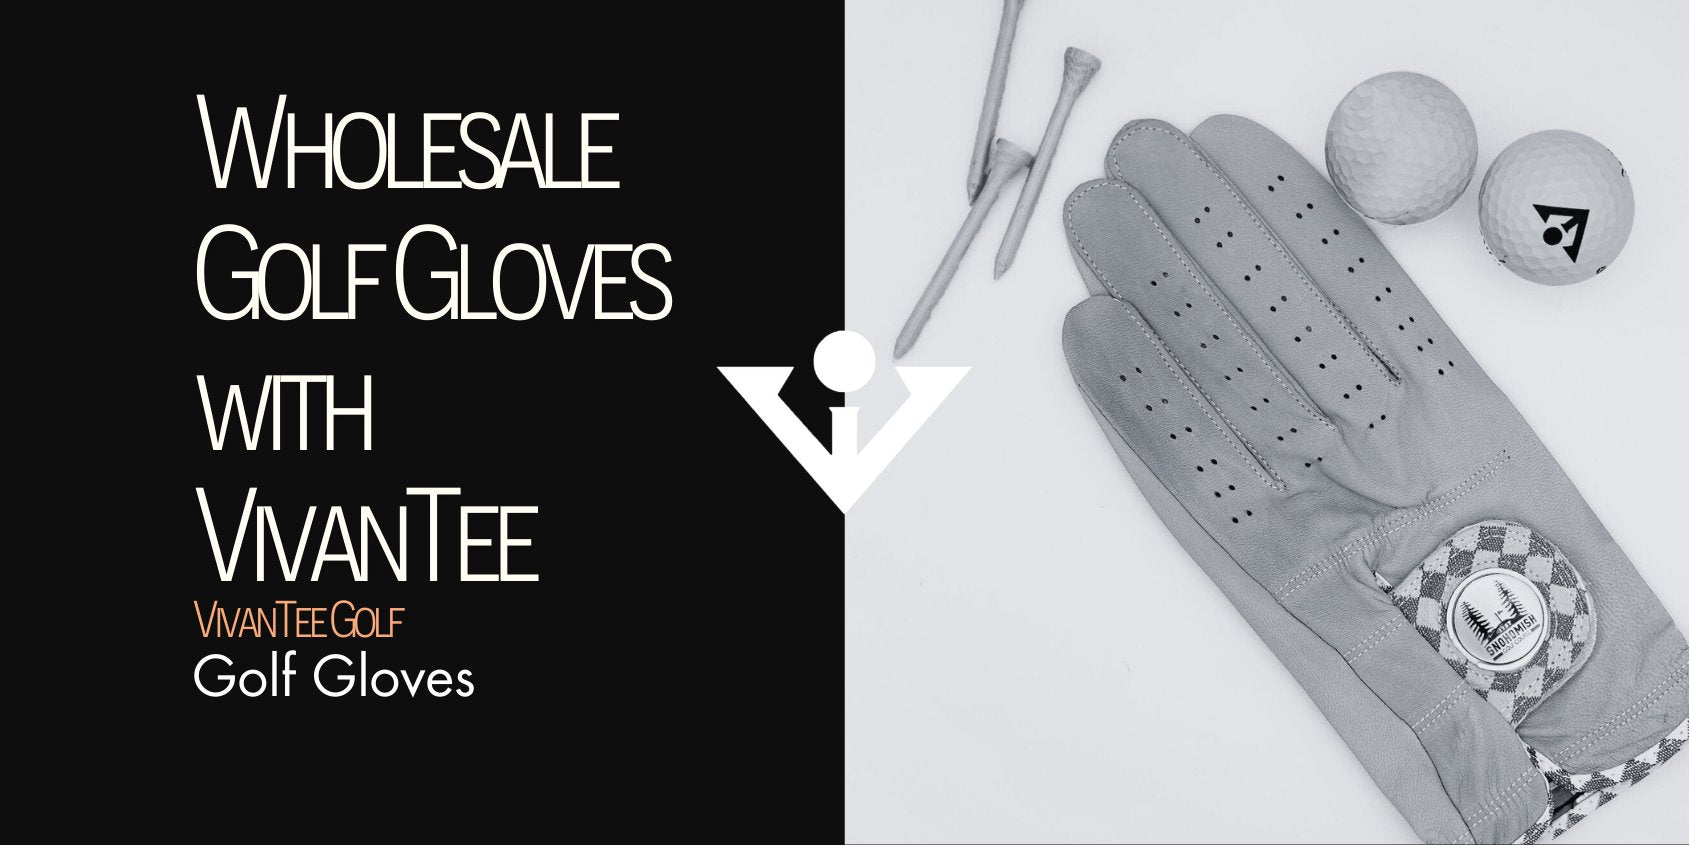 Image of a wholesale golf glove next to tees and a ball with magnetic ball marker in a golf shops custom logo, in our signature article banner titled "Wholesale Golf Gloves with VivanTee"